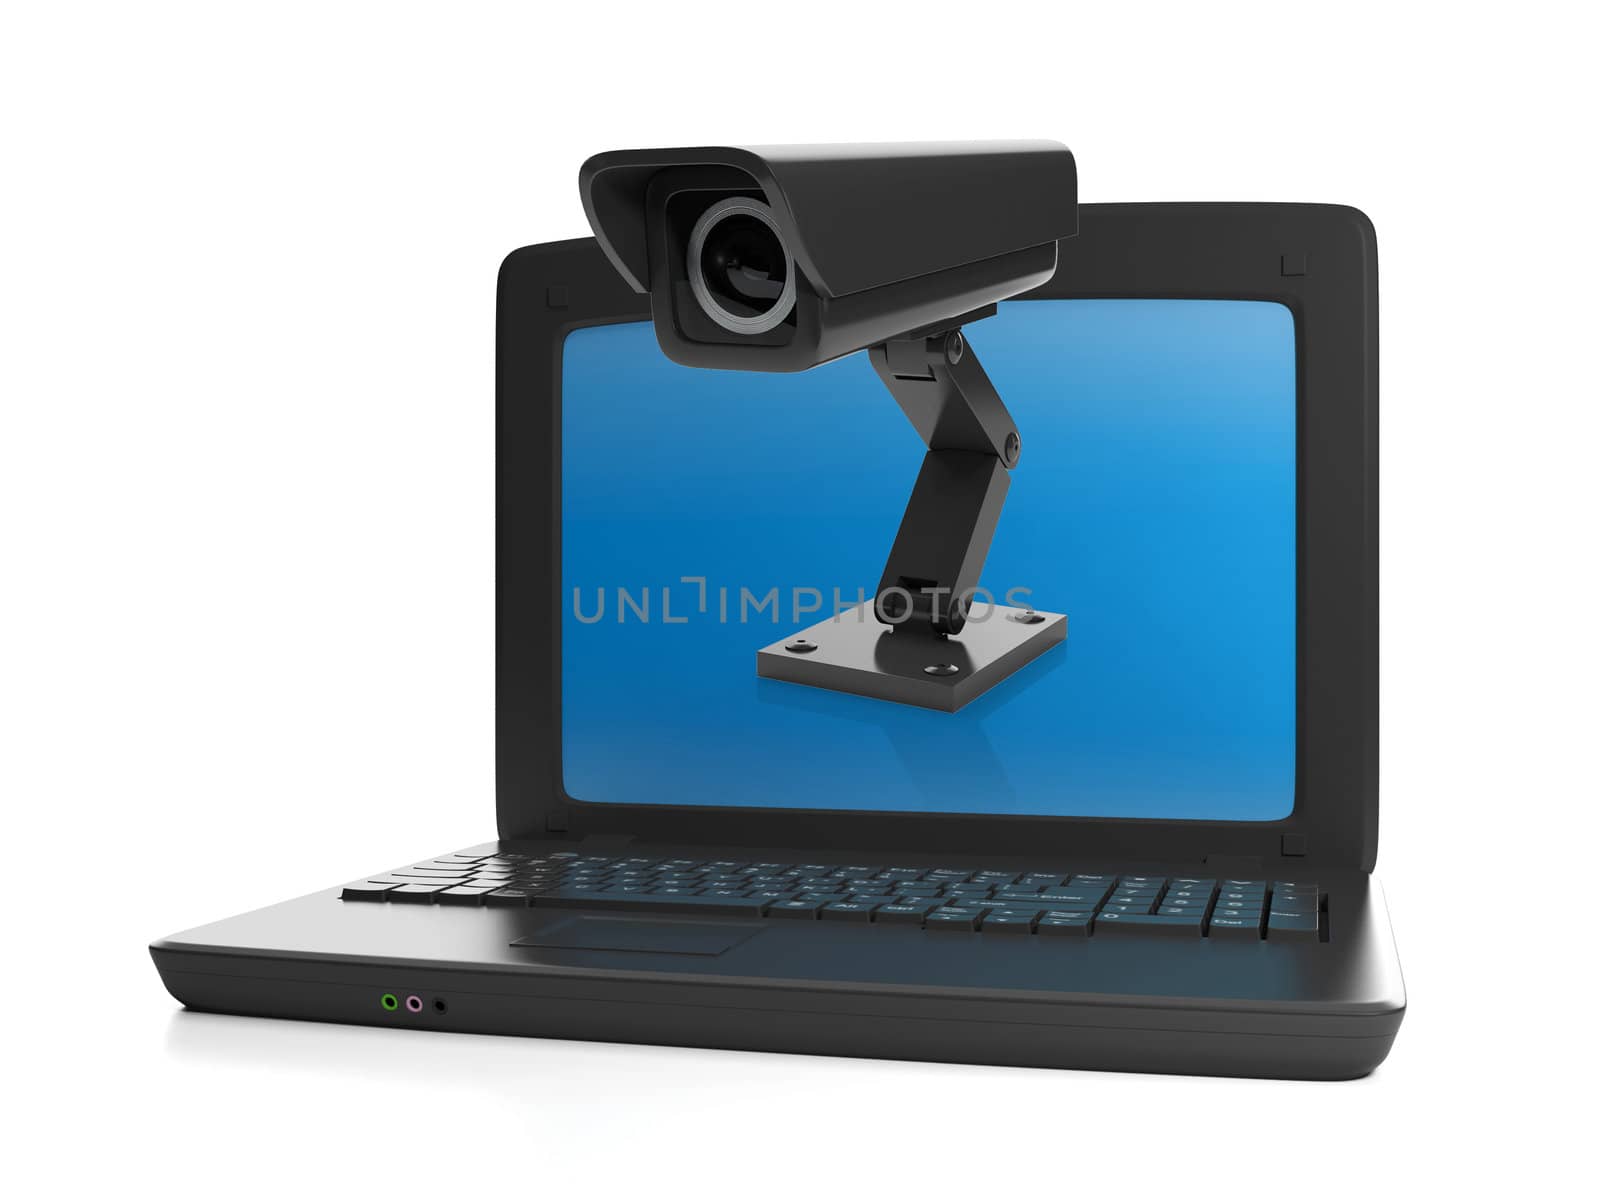 3d illustration of computer technologies. Installing CCTV, laptop and camera